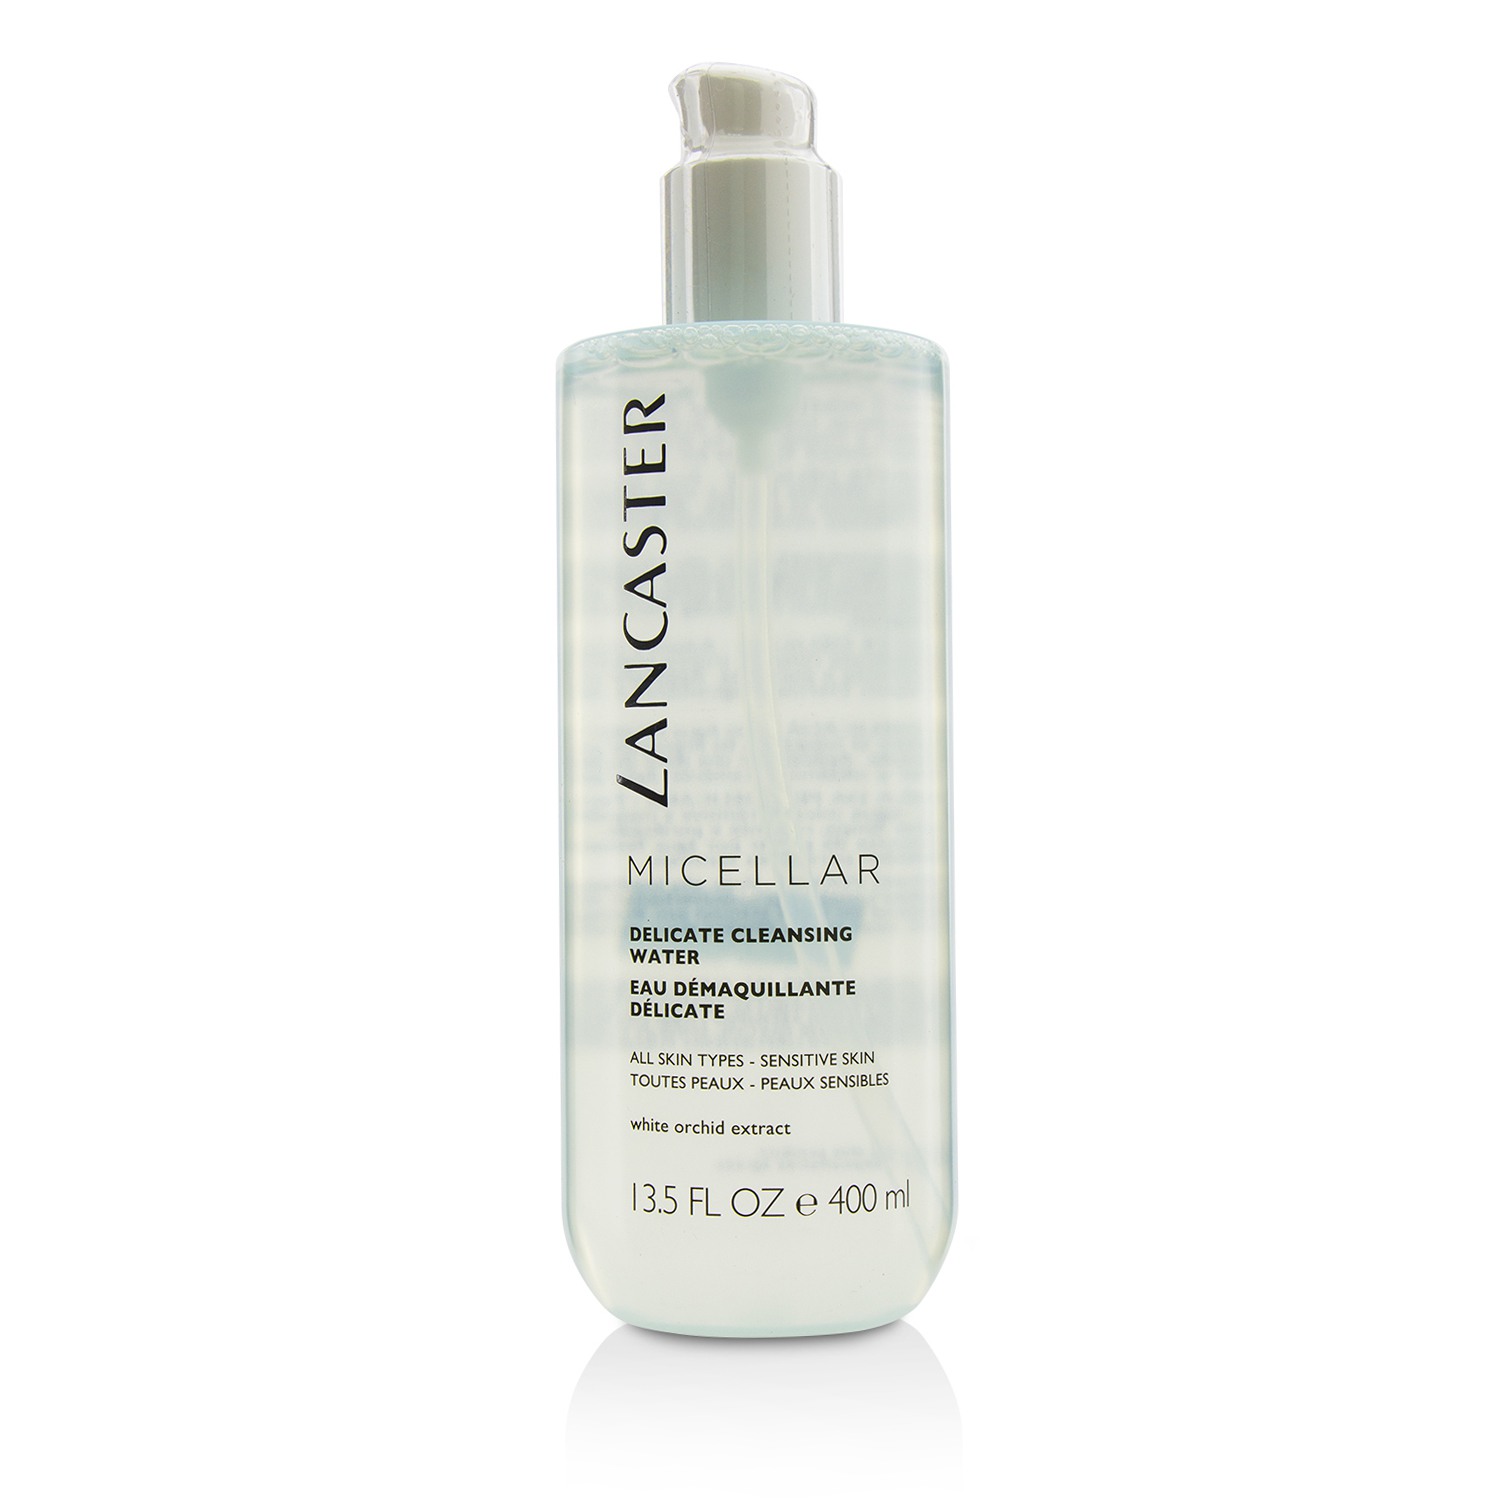 Micellar Delicate Cleansing Water - All Skin Types Including Sensitive Skin Lancaster Image